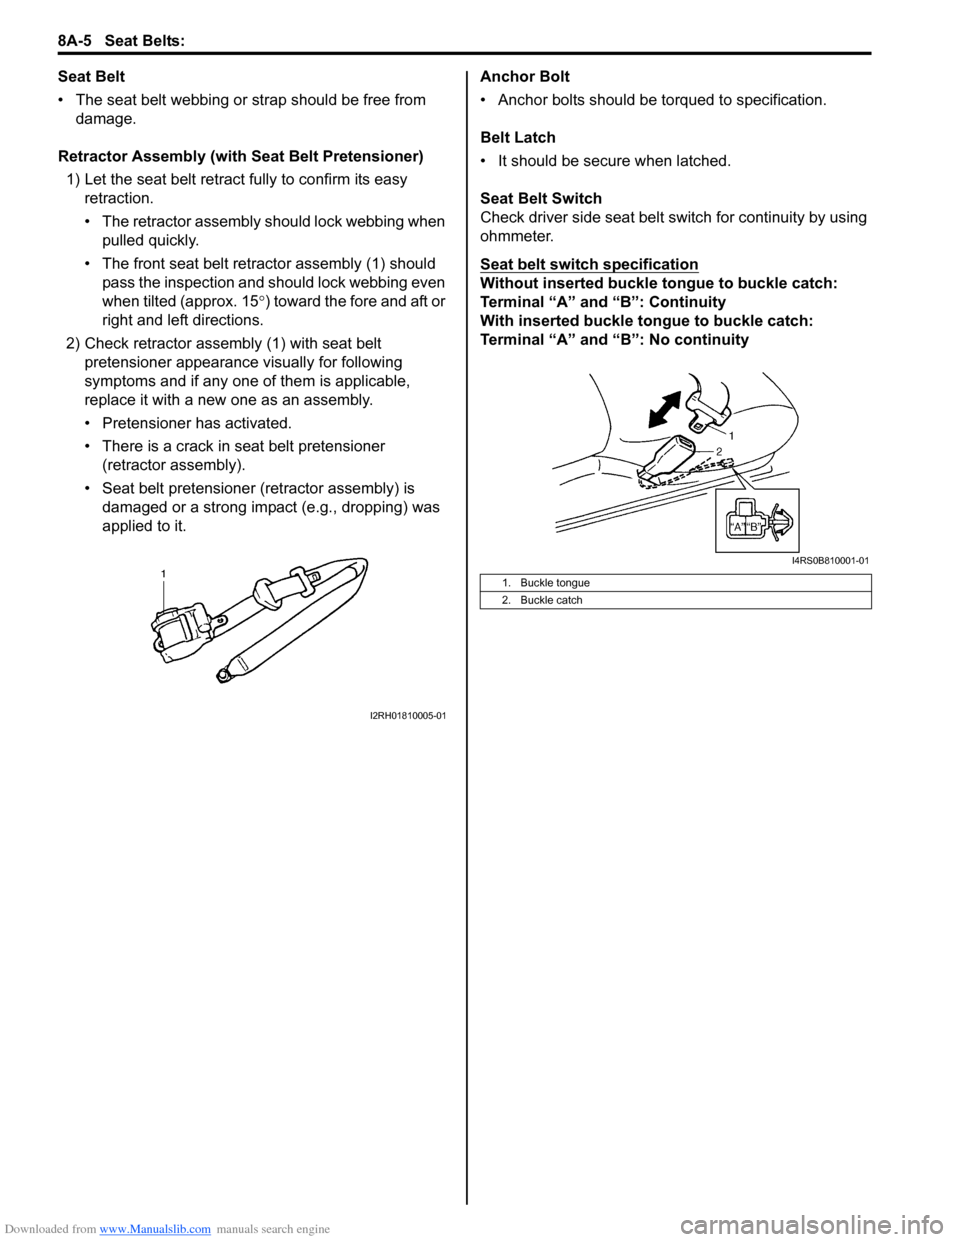 SUZUKI SWIFT 2007 2.G Service Workshop Manual Downloaded from www.Manualslib.com manuals search engine 8A-5 Seat Belts: 
Seat Belt
• The seat belt webbing or strap should be free from damage.
Retractor Assembly (with Seat Belt Pretensioner) 1) 